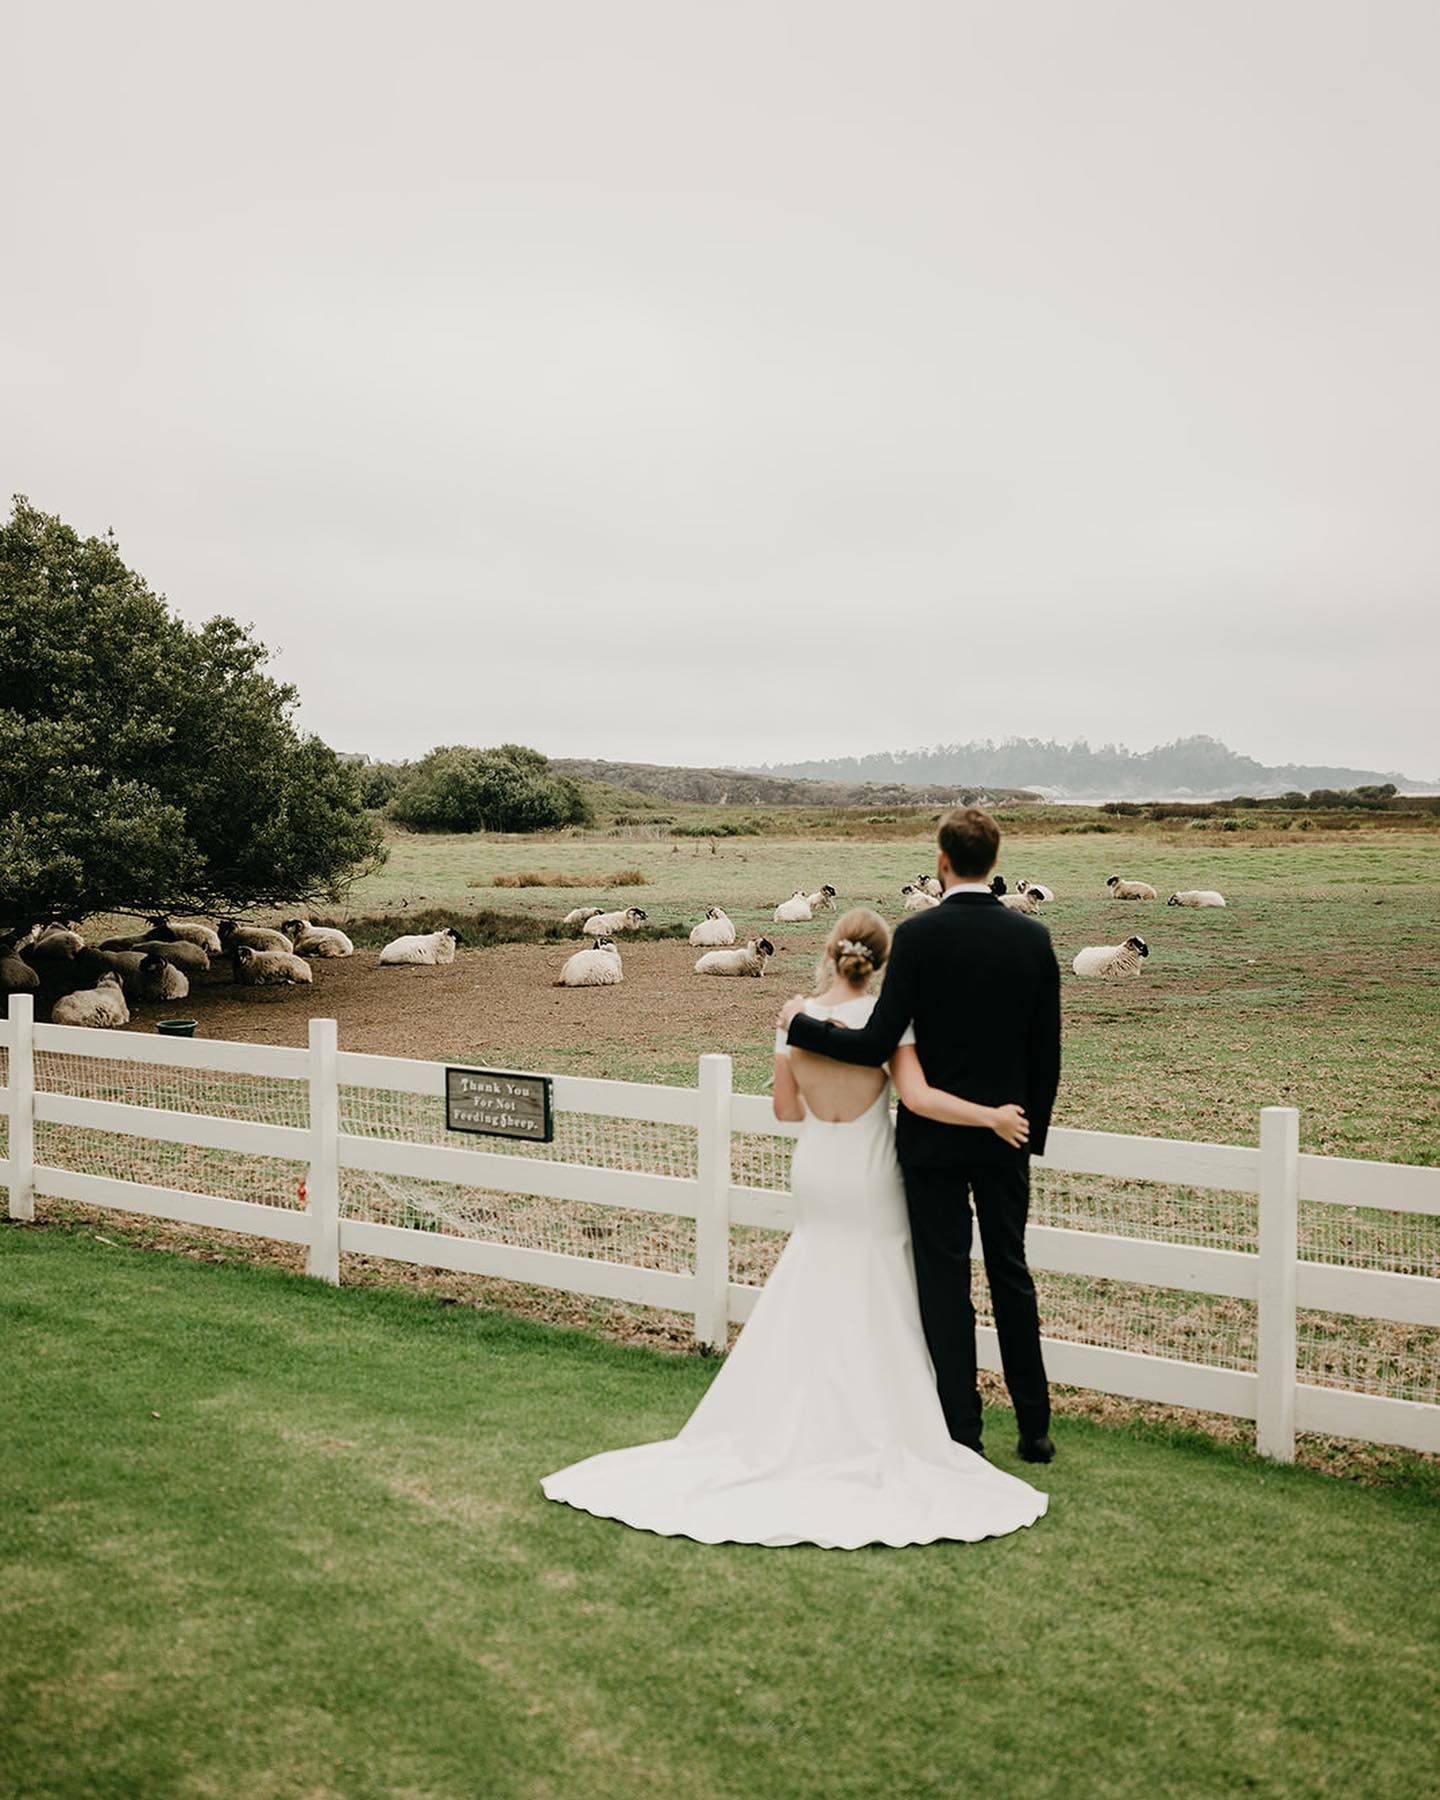 The historic Mission Ranch has some of the best views if you want to share your wedding day with some grazing friends 🤗🐑 Dating all the way back to the 1800s, the charm this place has is hard to beat 🌾

Photographer: @hellobrandonscott
Planning: @